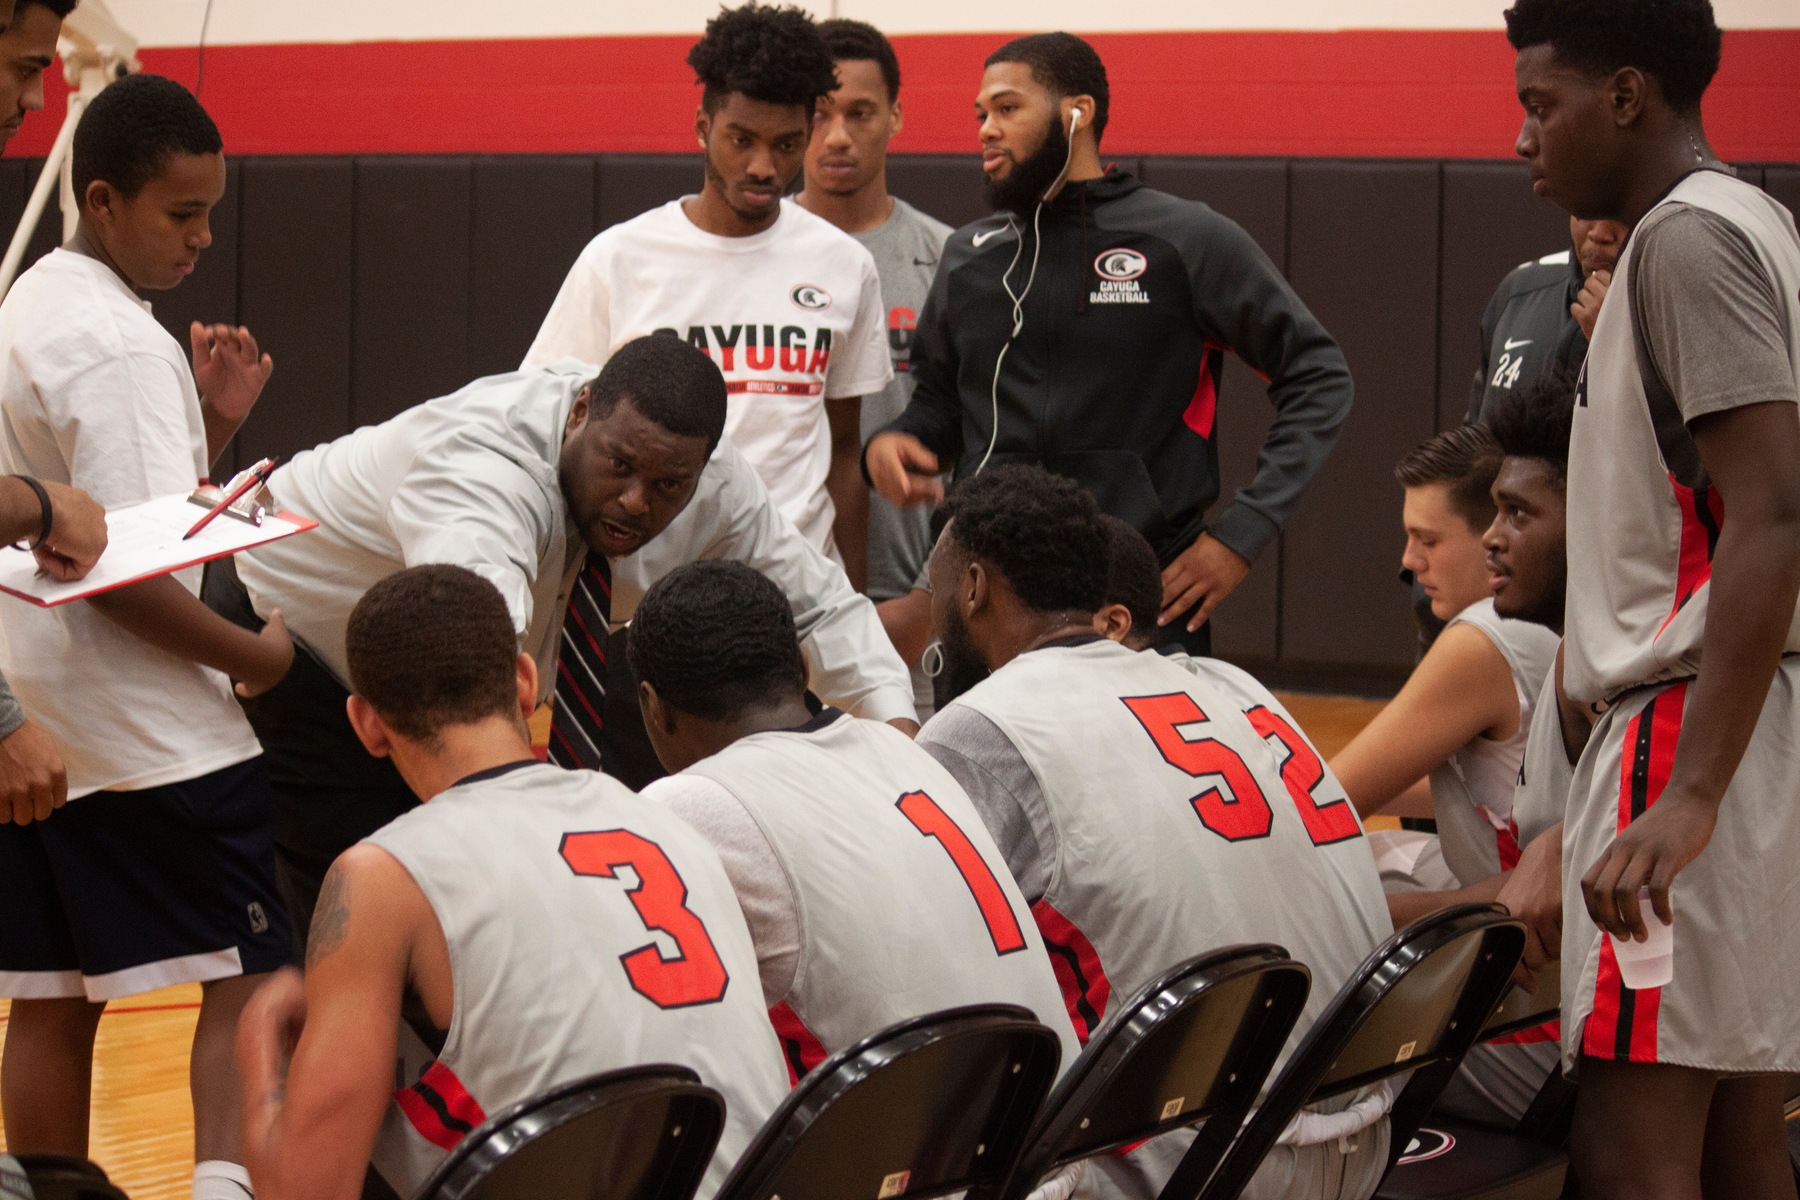 The Cayuga Community College Men's Basketball Team recently dropped a close game to Davis College. The team enters the midseason break with a record of 4-5. Photo courtesy of the Cayuga Collegian.